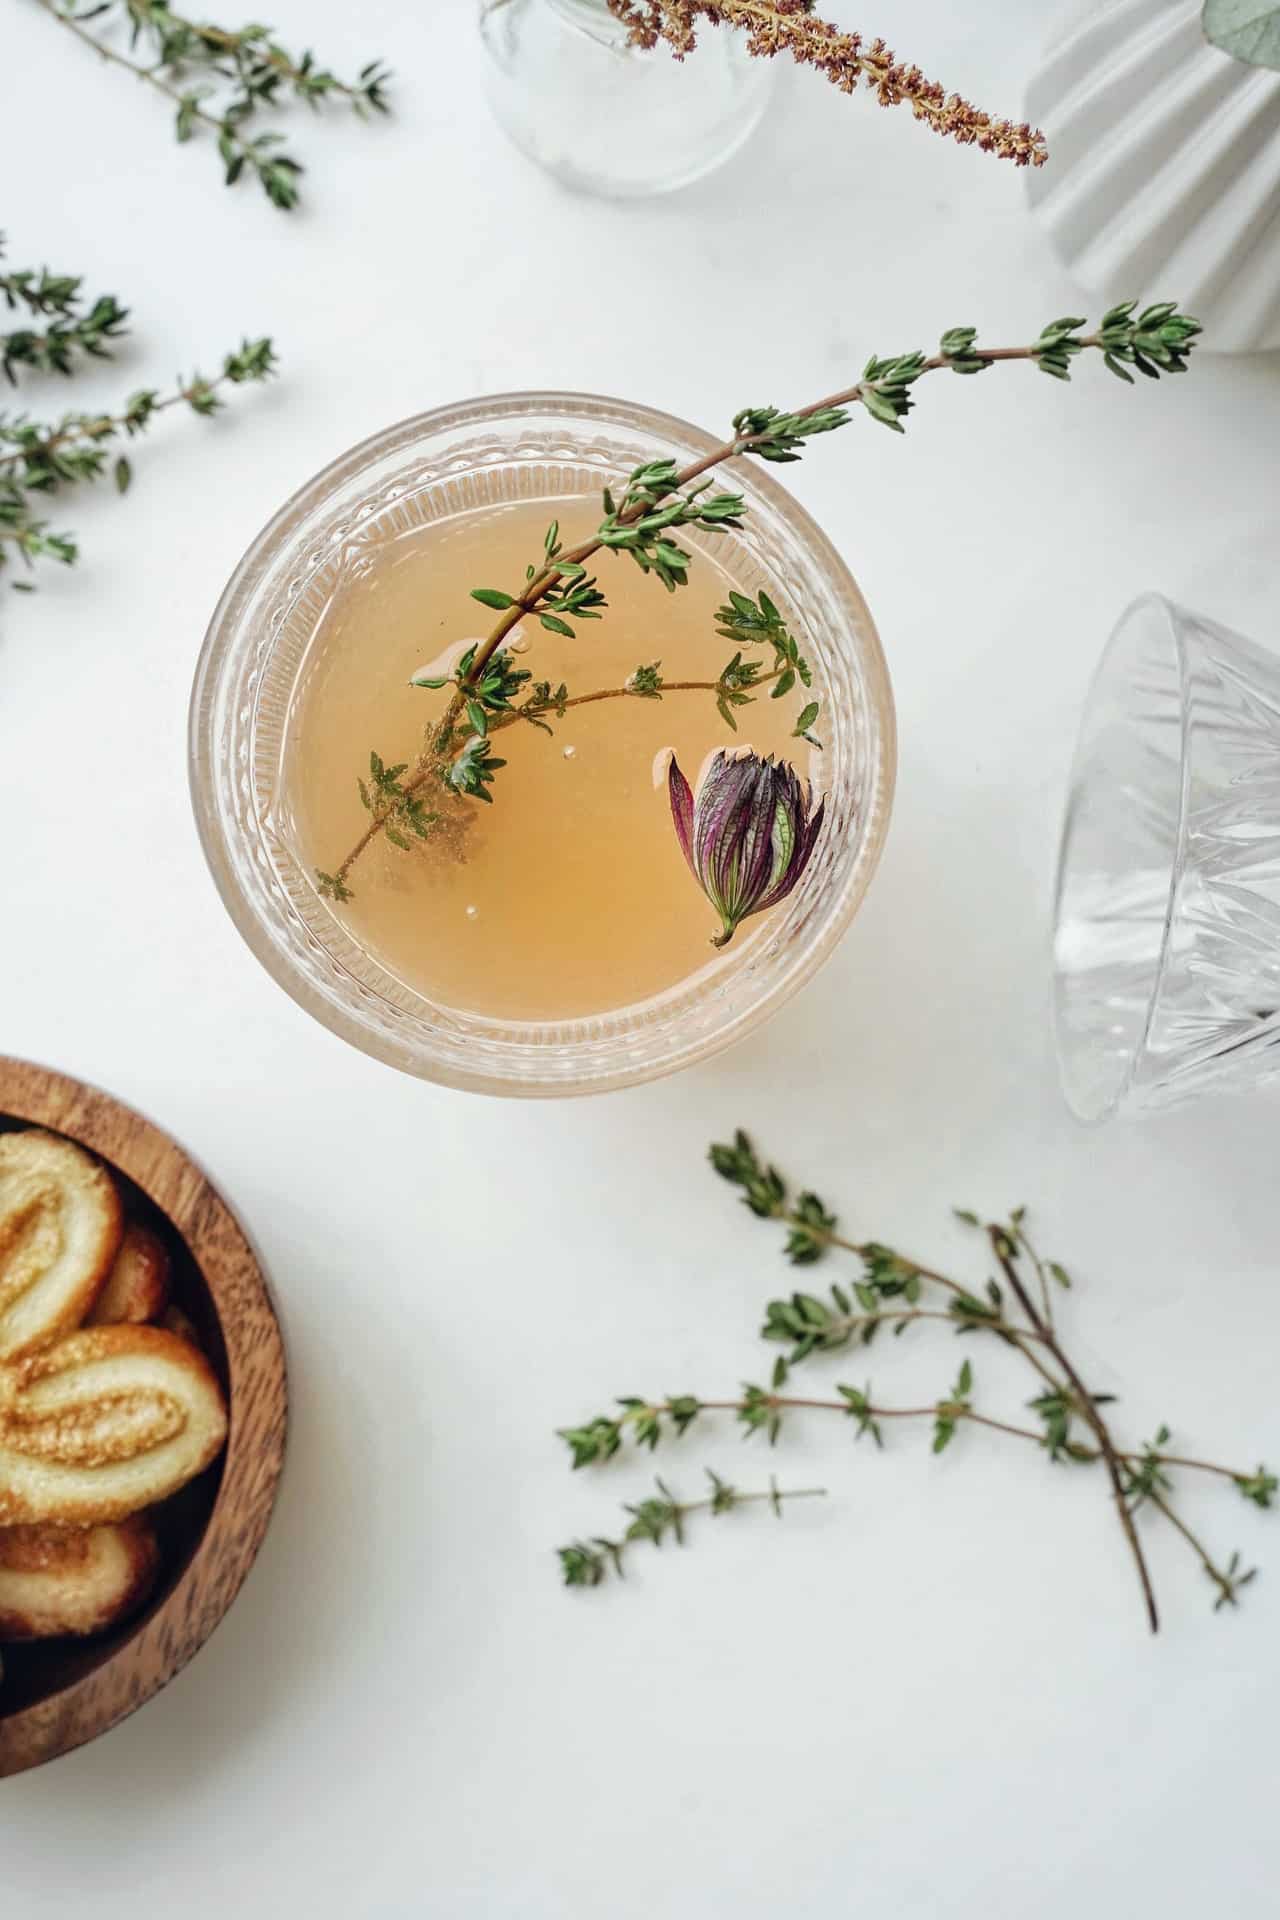 What herbs are worth drinking to be beautiful and healthy?